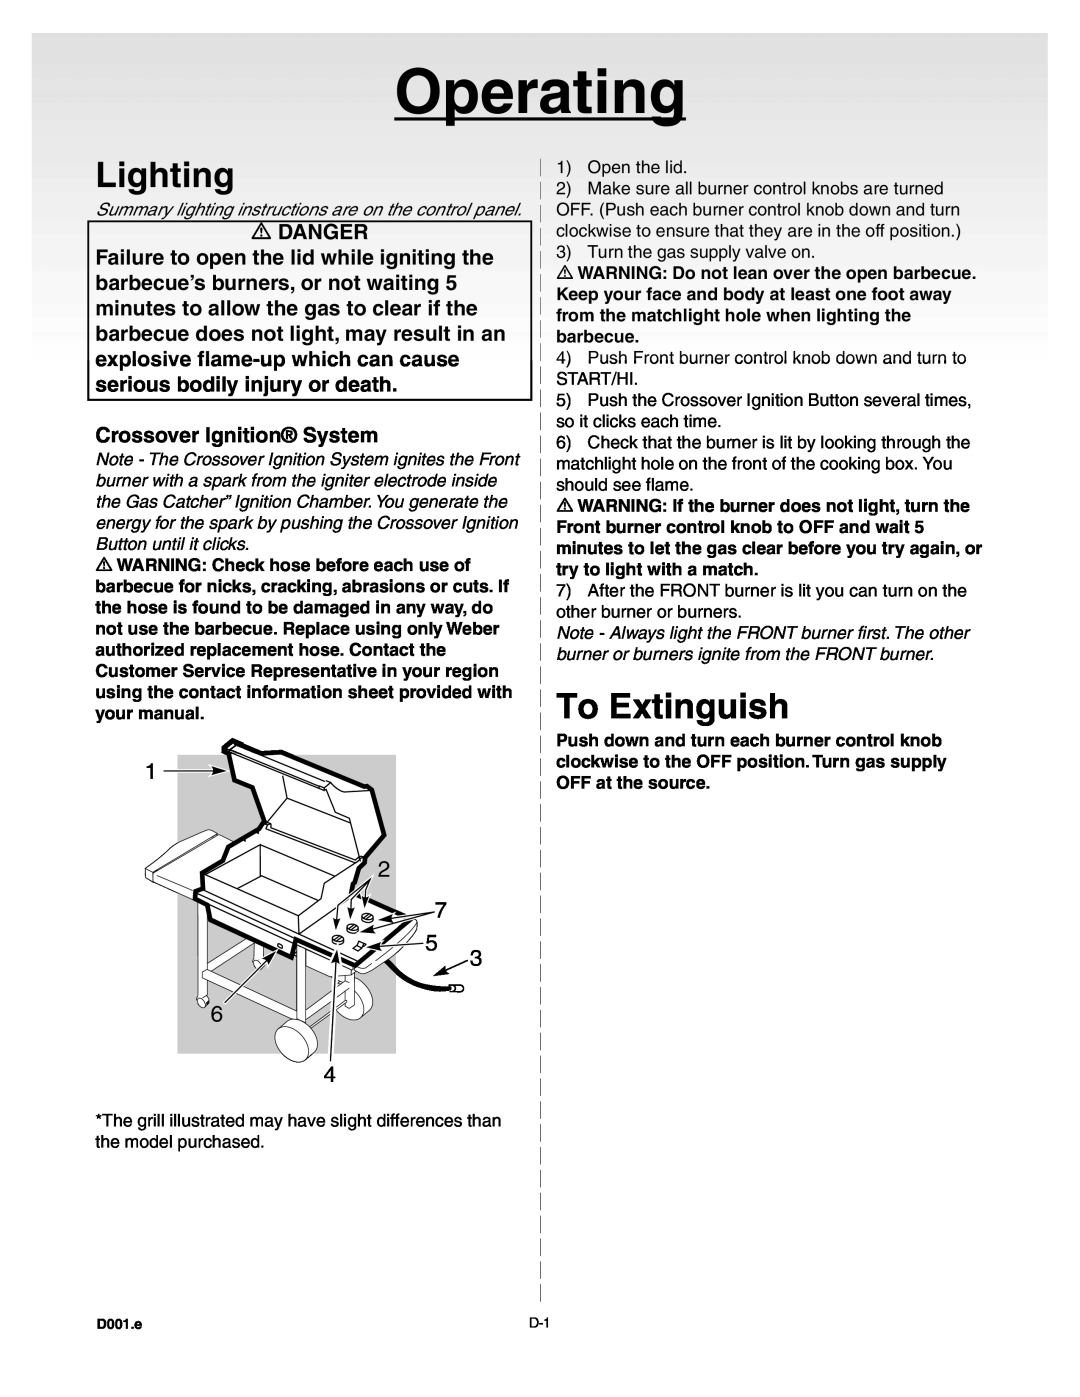 Weber A101.c, B067.E, C052.C manual Lighting, To Extinguish, Crossover Ignition System, Operating, Danger 